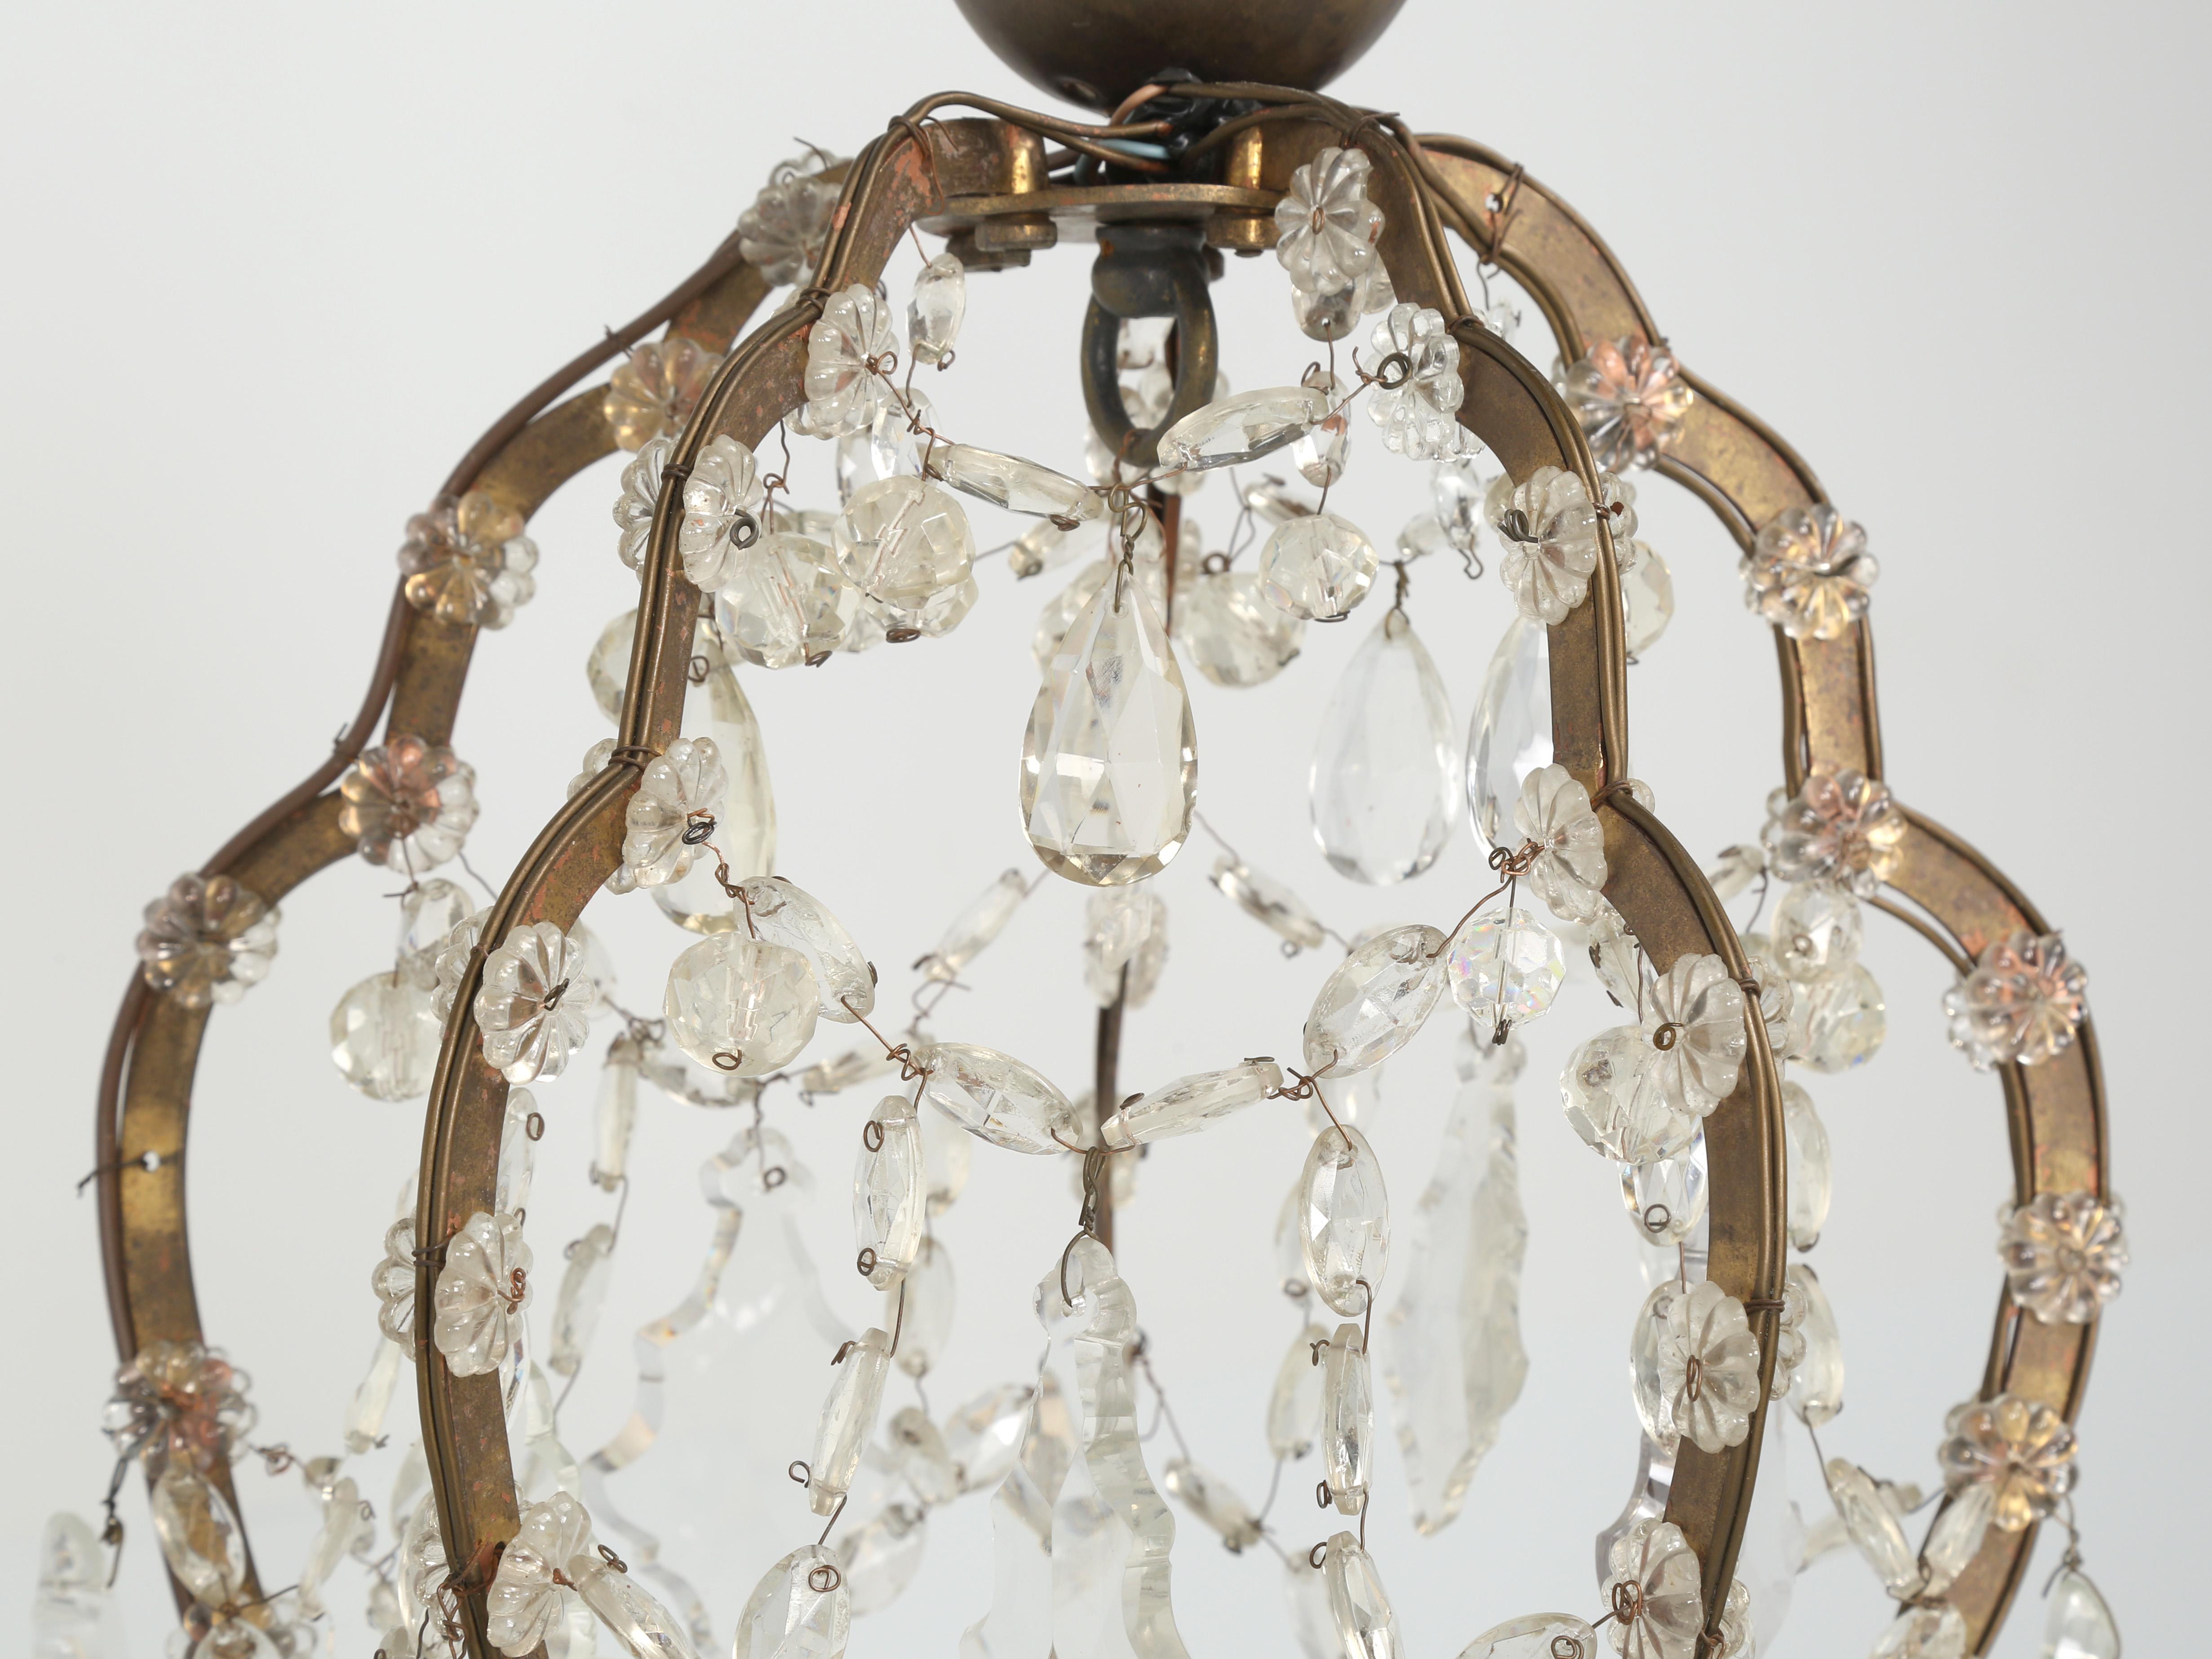 Hand-Crafted Vintage French Crystal Chandelier